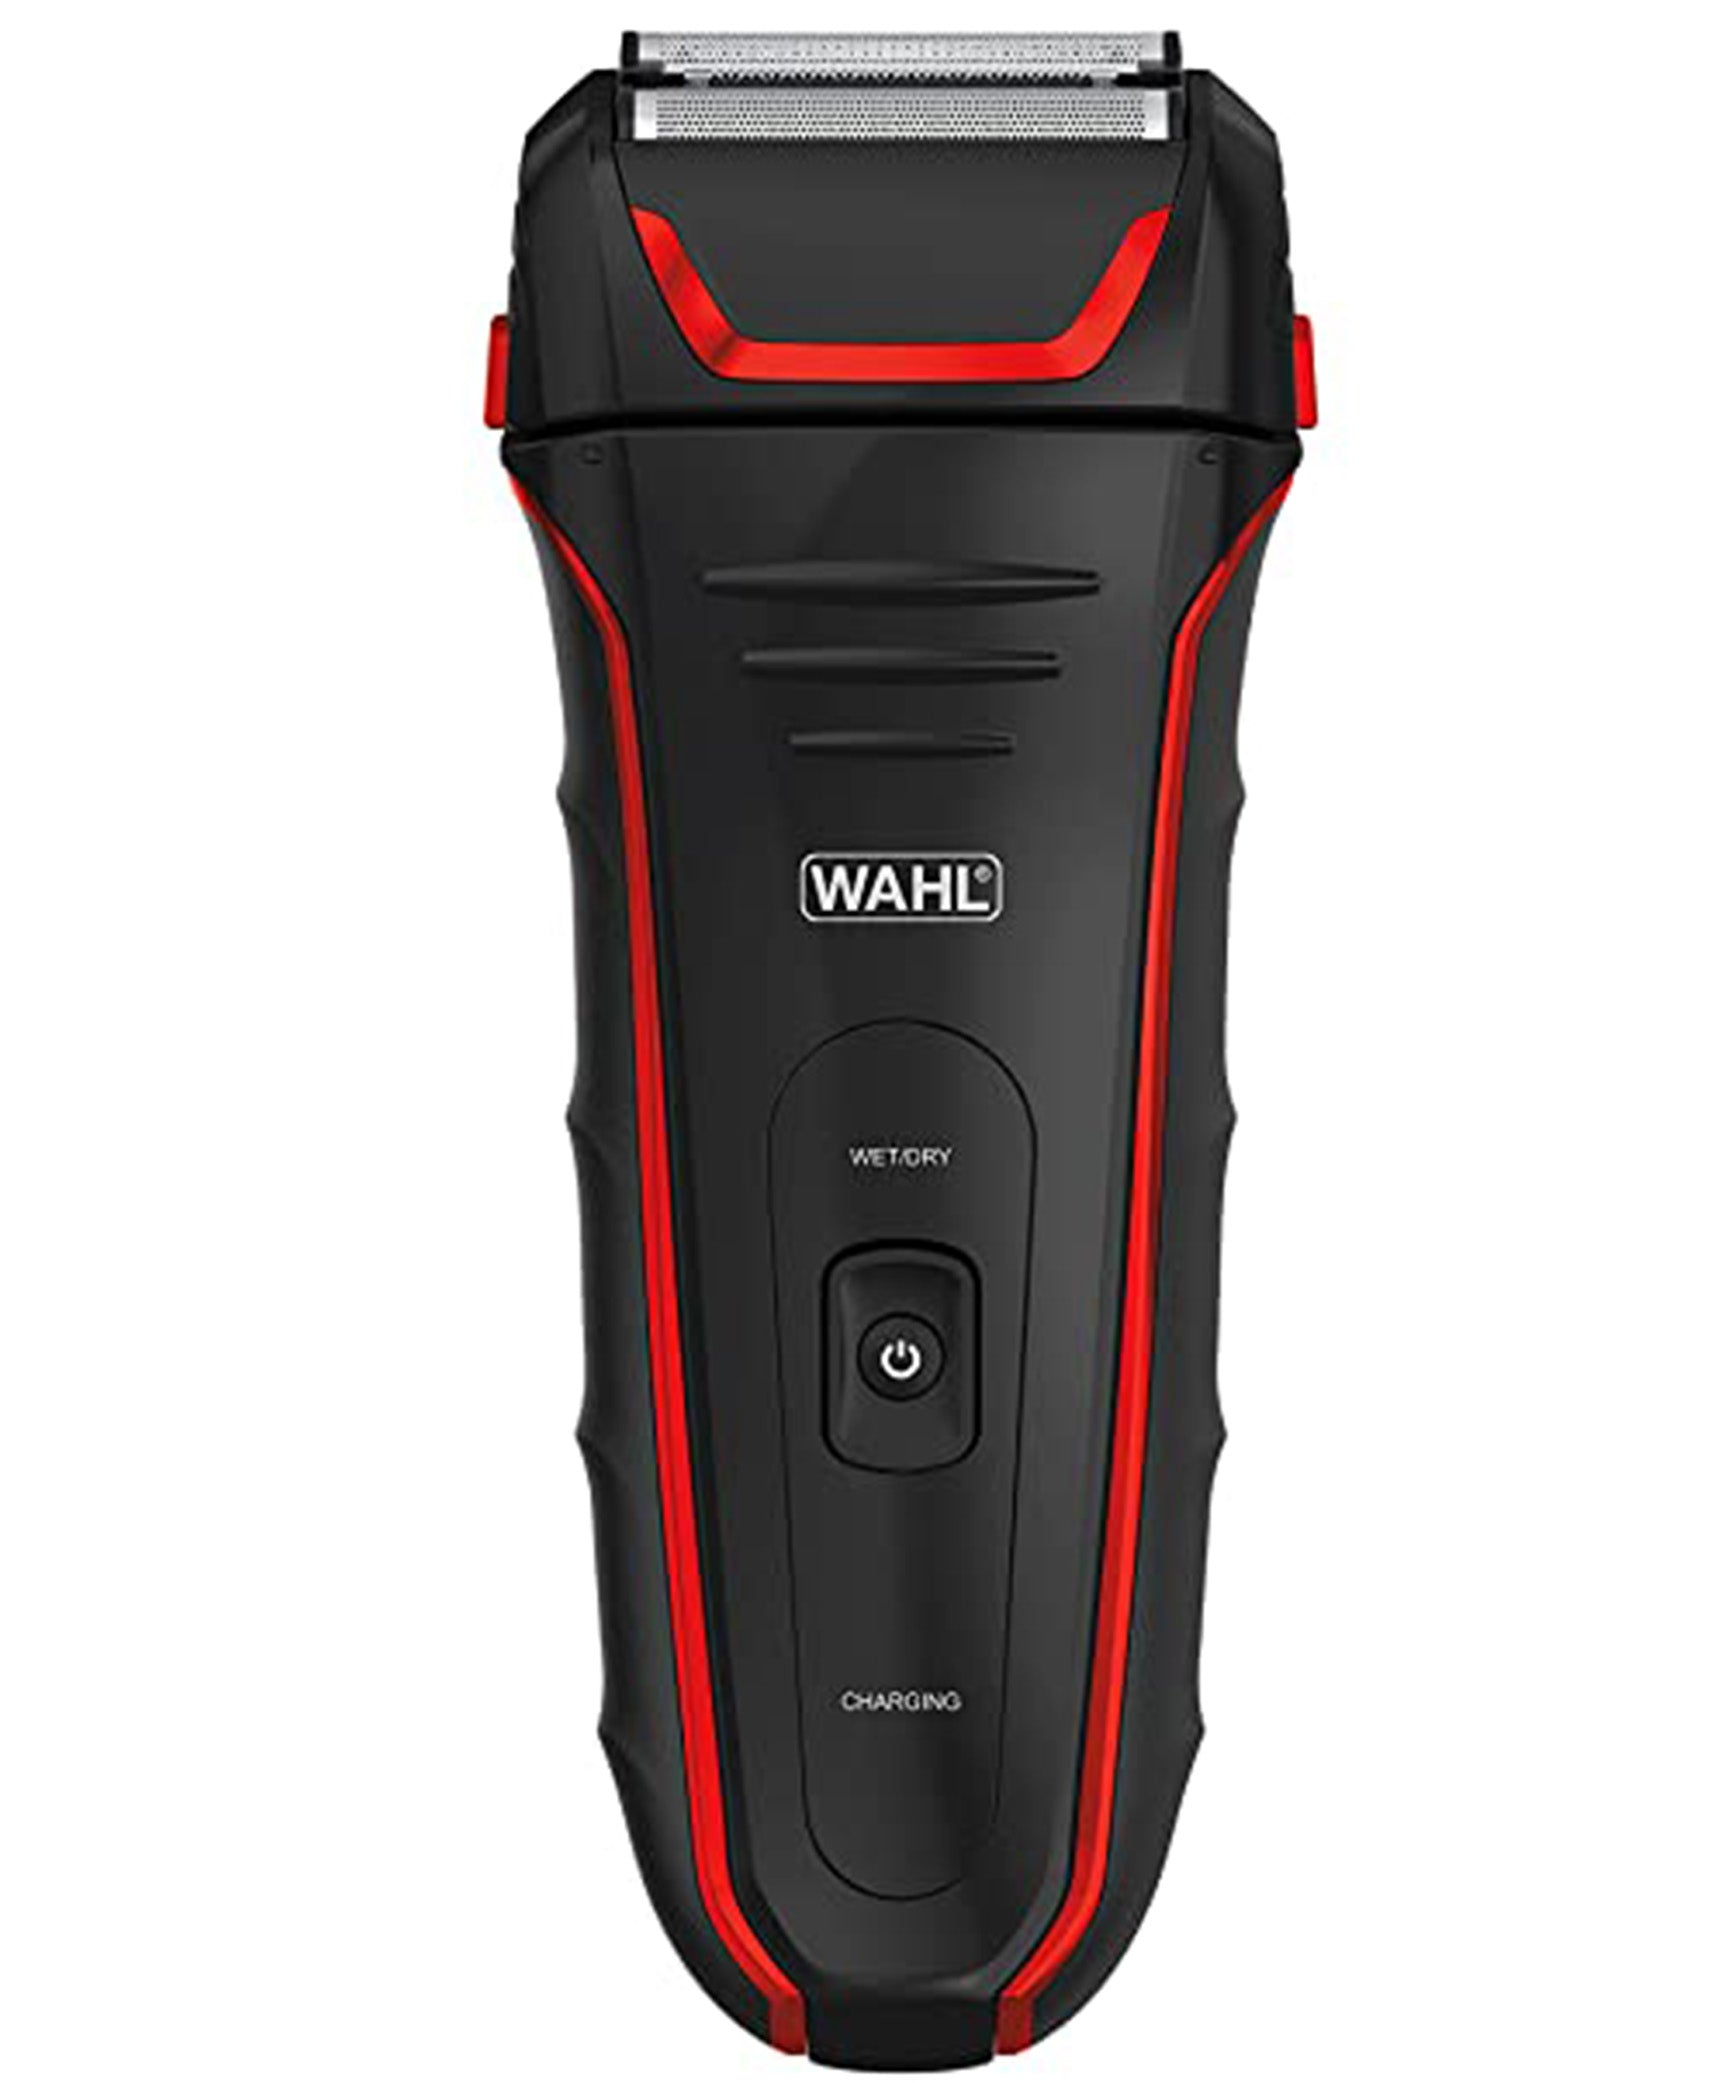 Wahl Clean And Close Plus Electric Shavers For Men, 07064-027